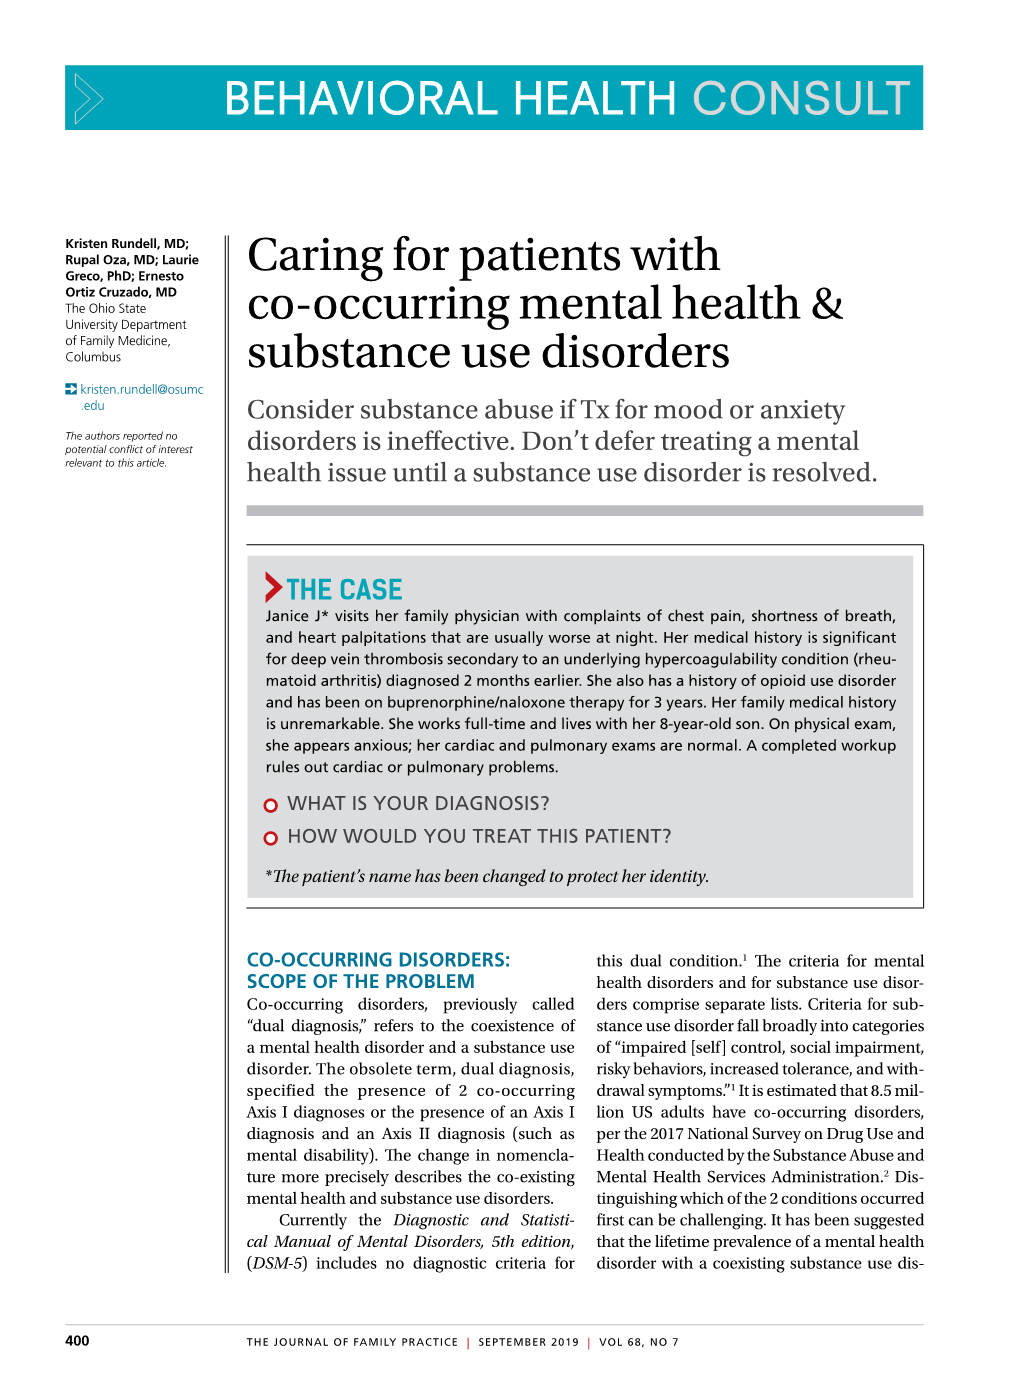 Caring for Patients with Co-Occurring Mental Health & Substance Use